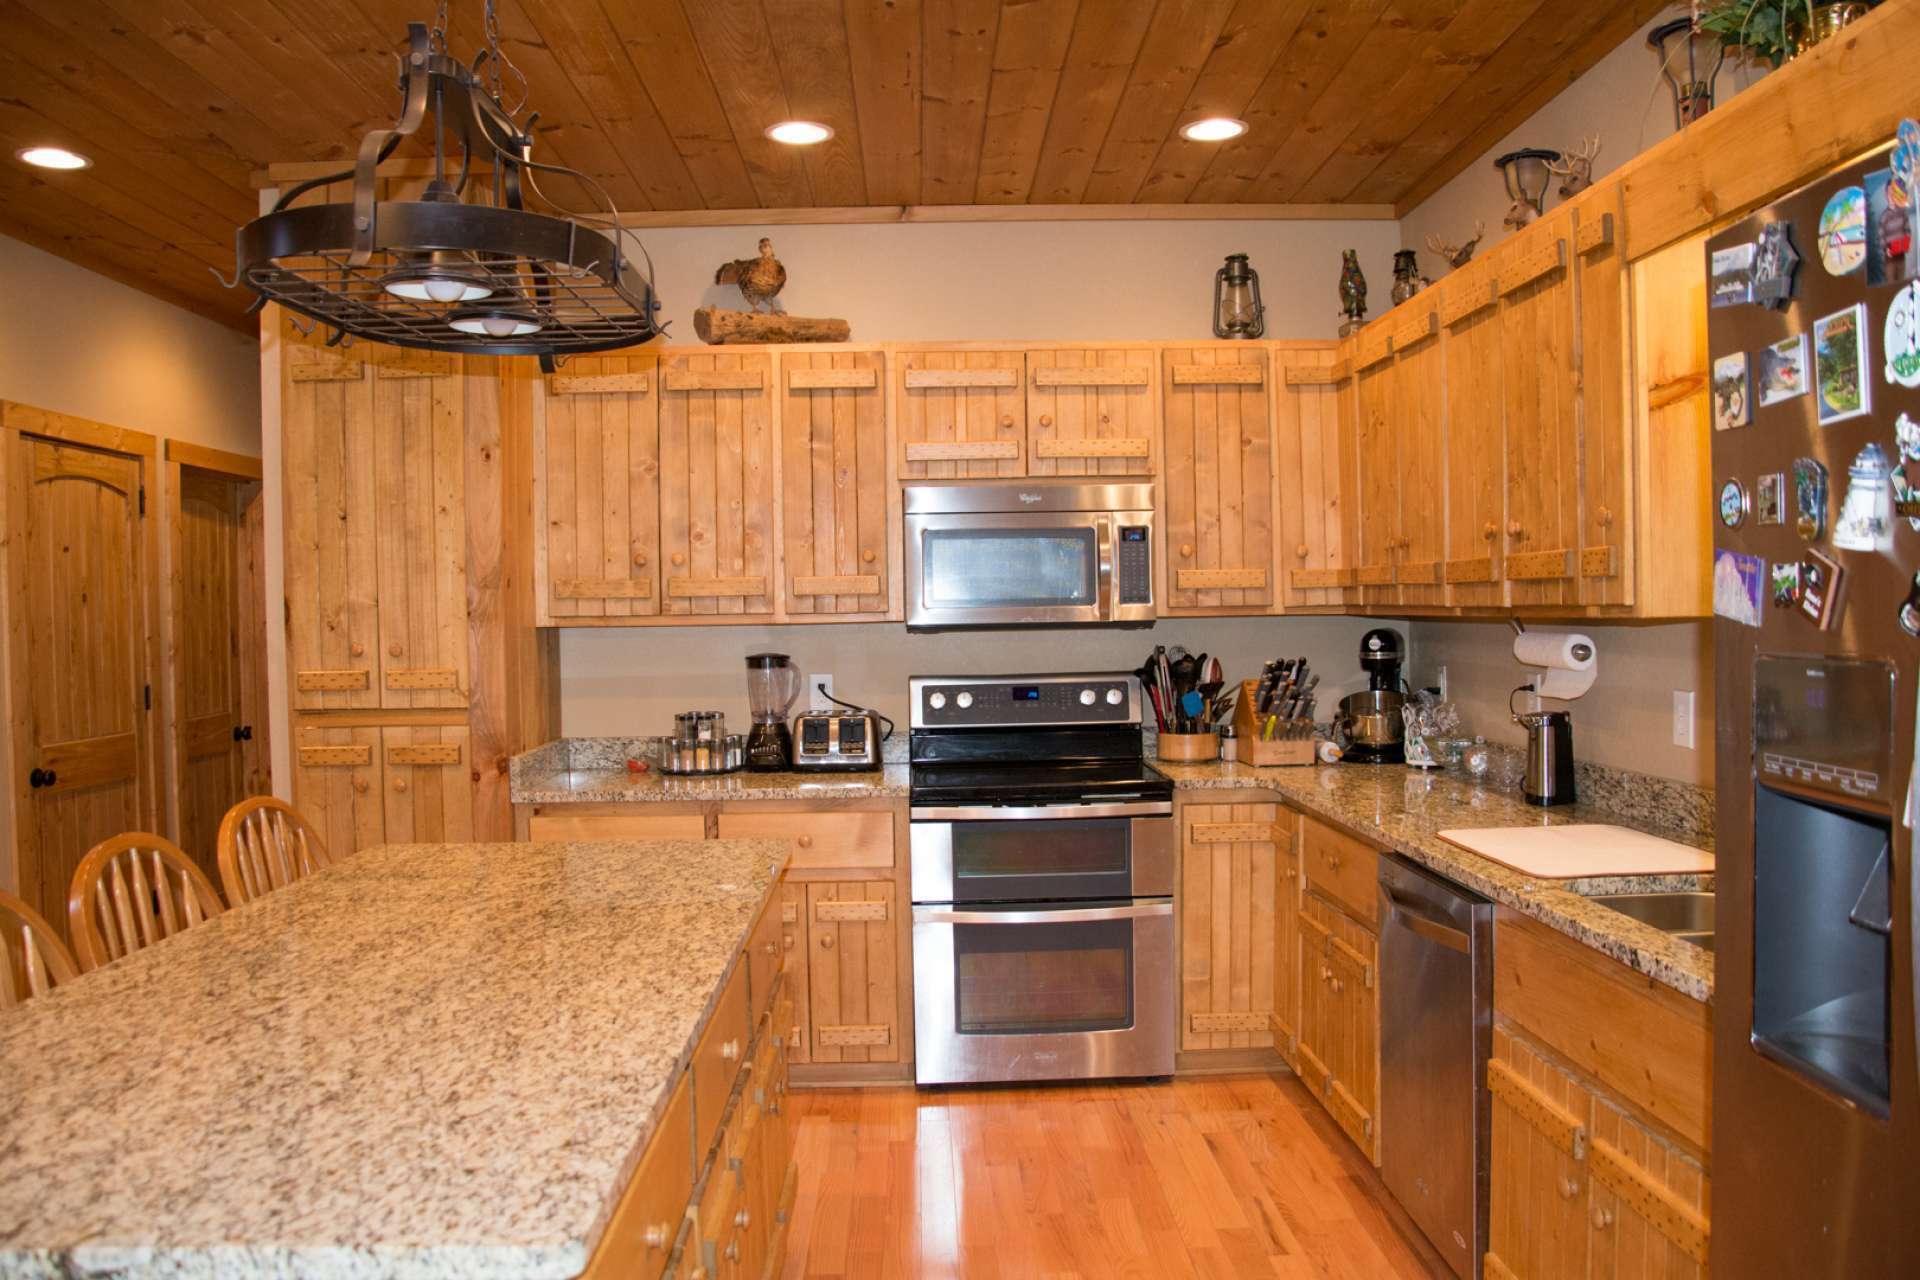 The beautiful kitchen offers custom cabinetry with granite counter tops, stainless appliances, large center work island and more than ample work and storage space.